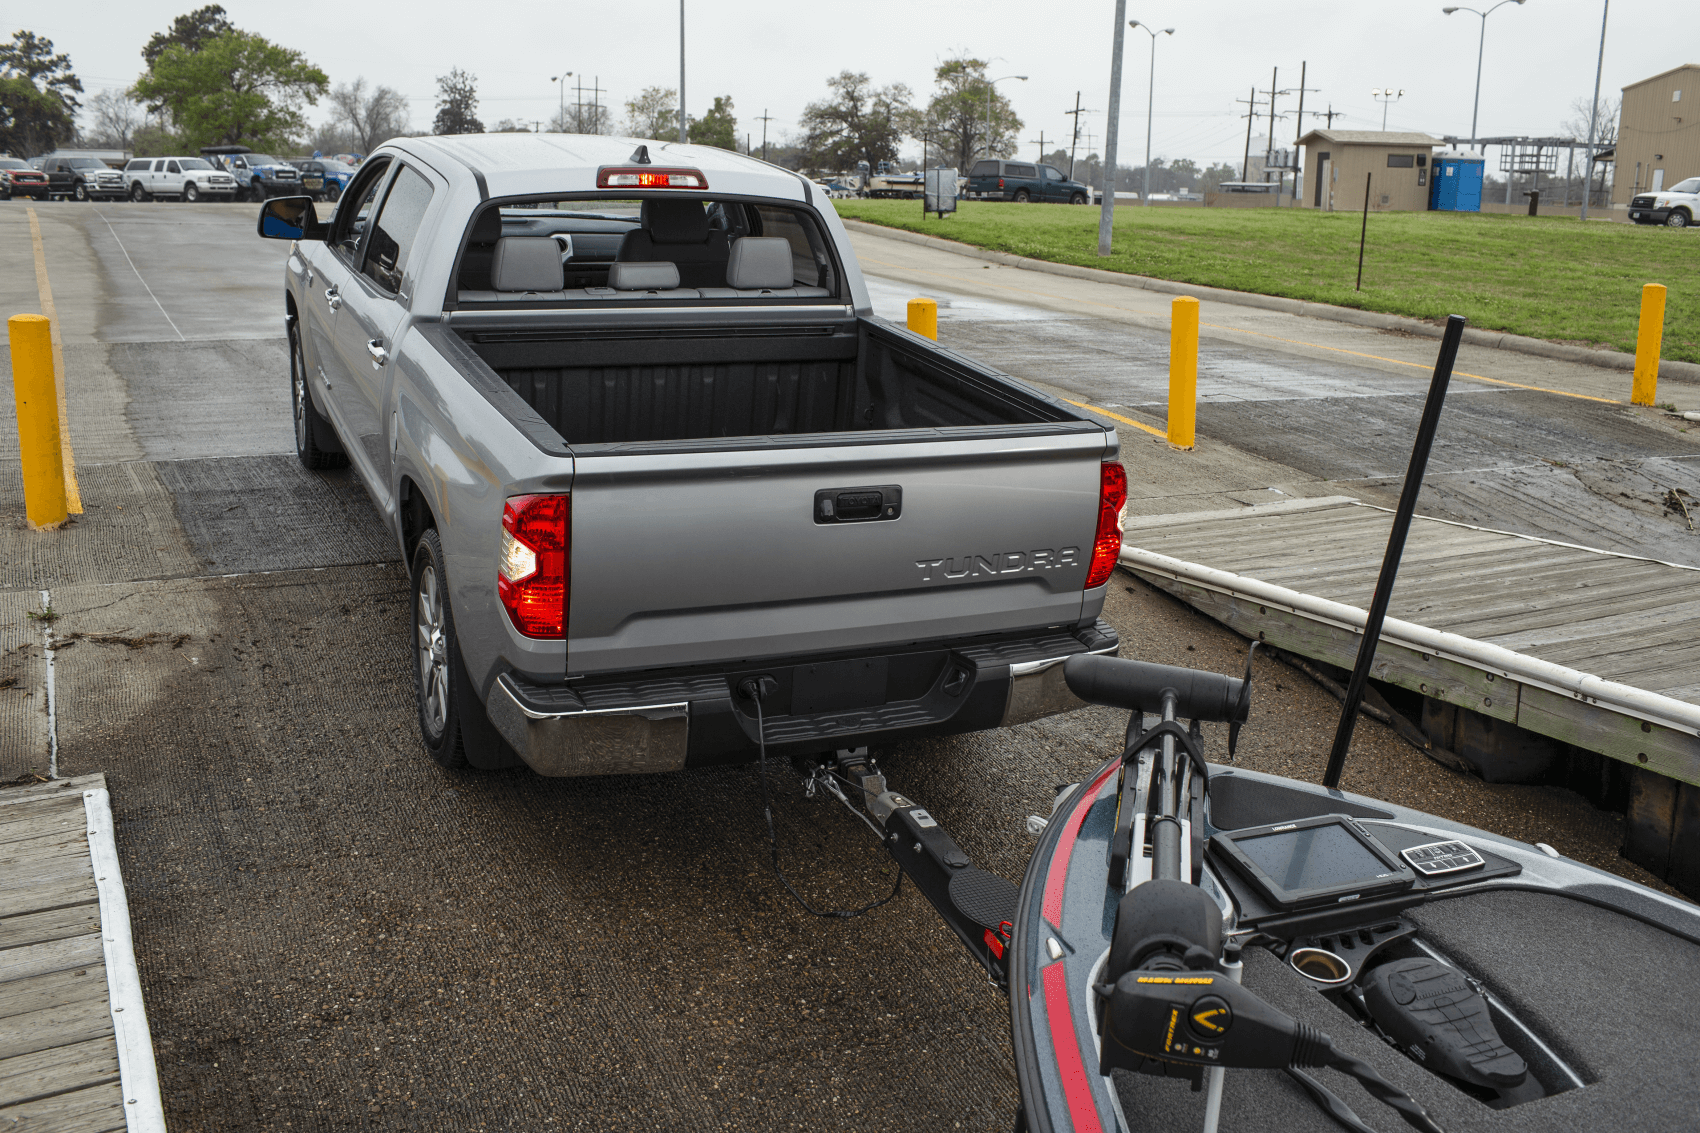 2021 Toyota Tundra Towing Boat Silver Dock